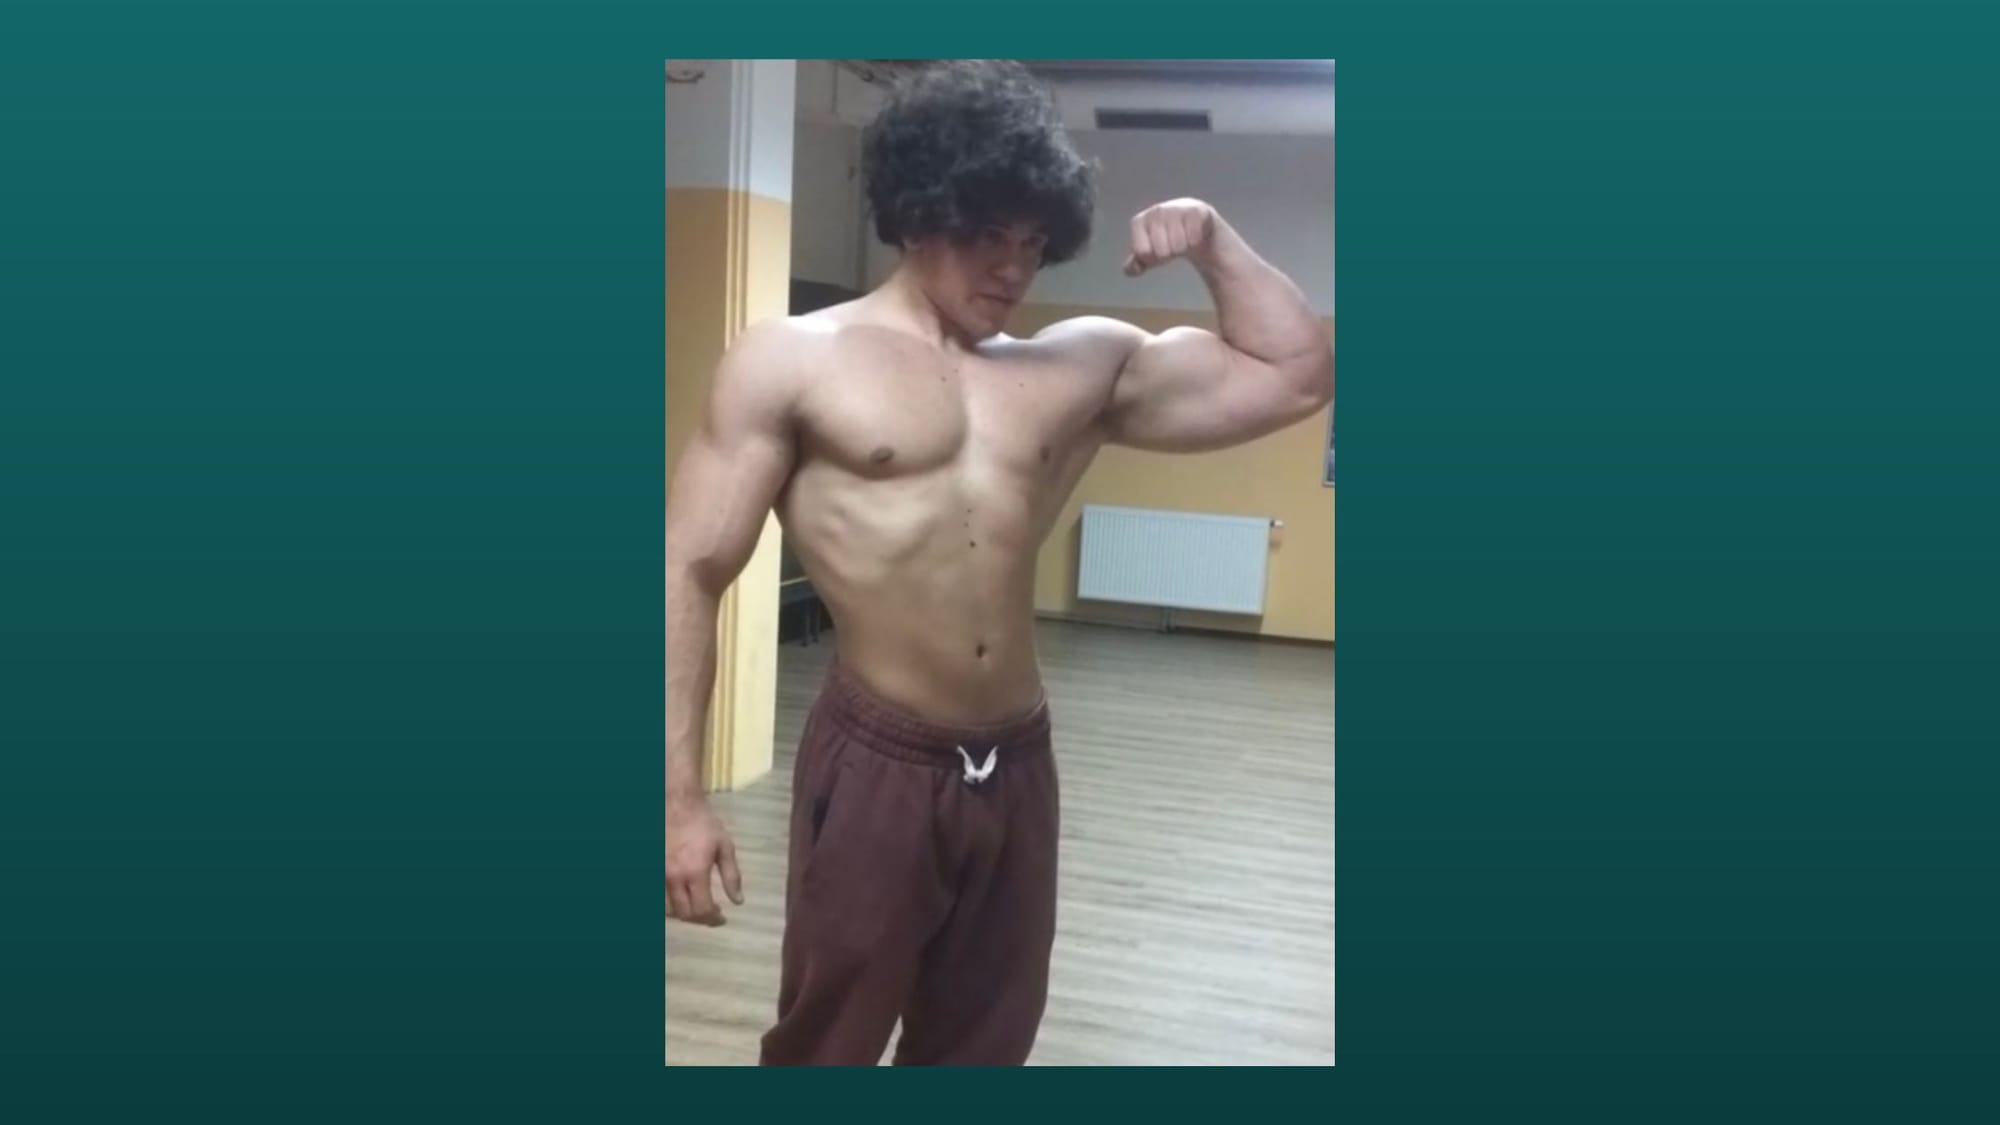 flexing in front of the mirrow with an old school biceps pose